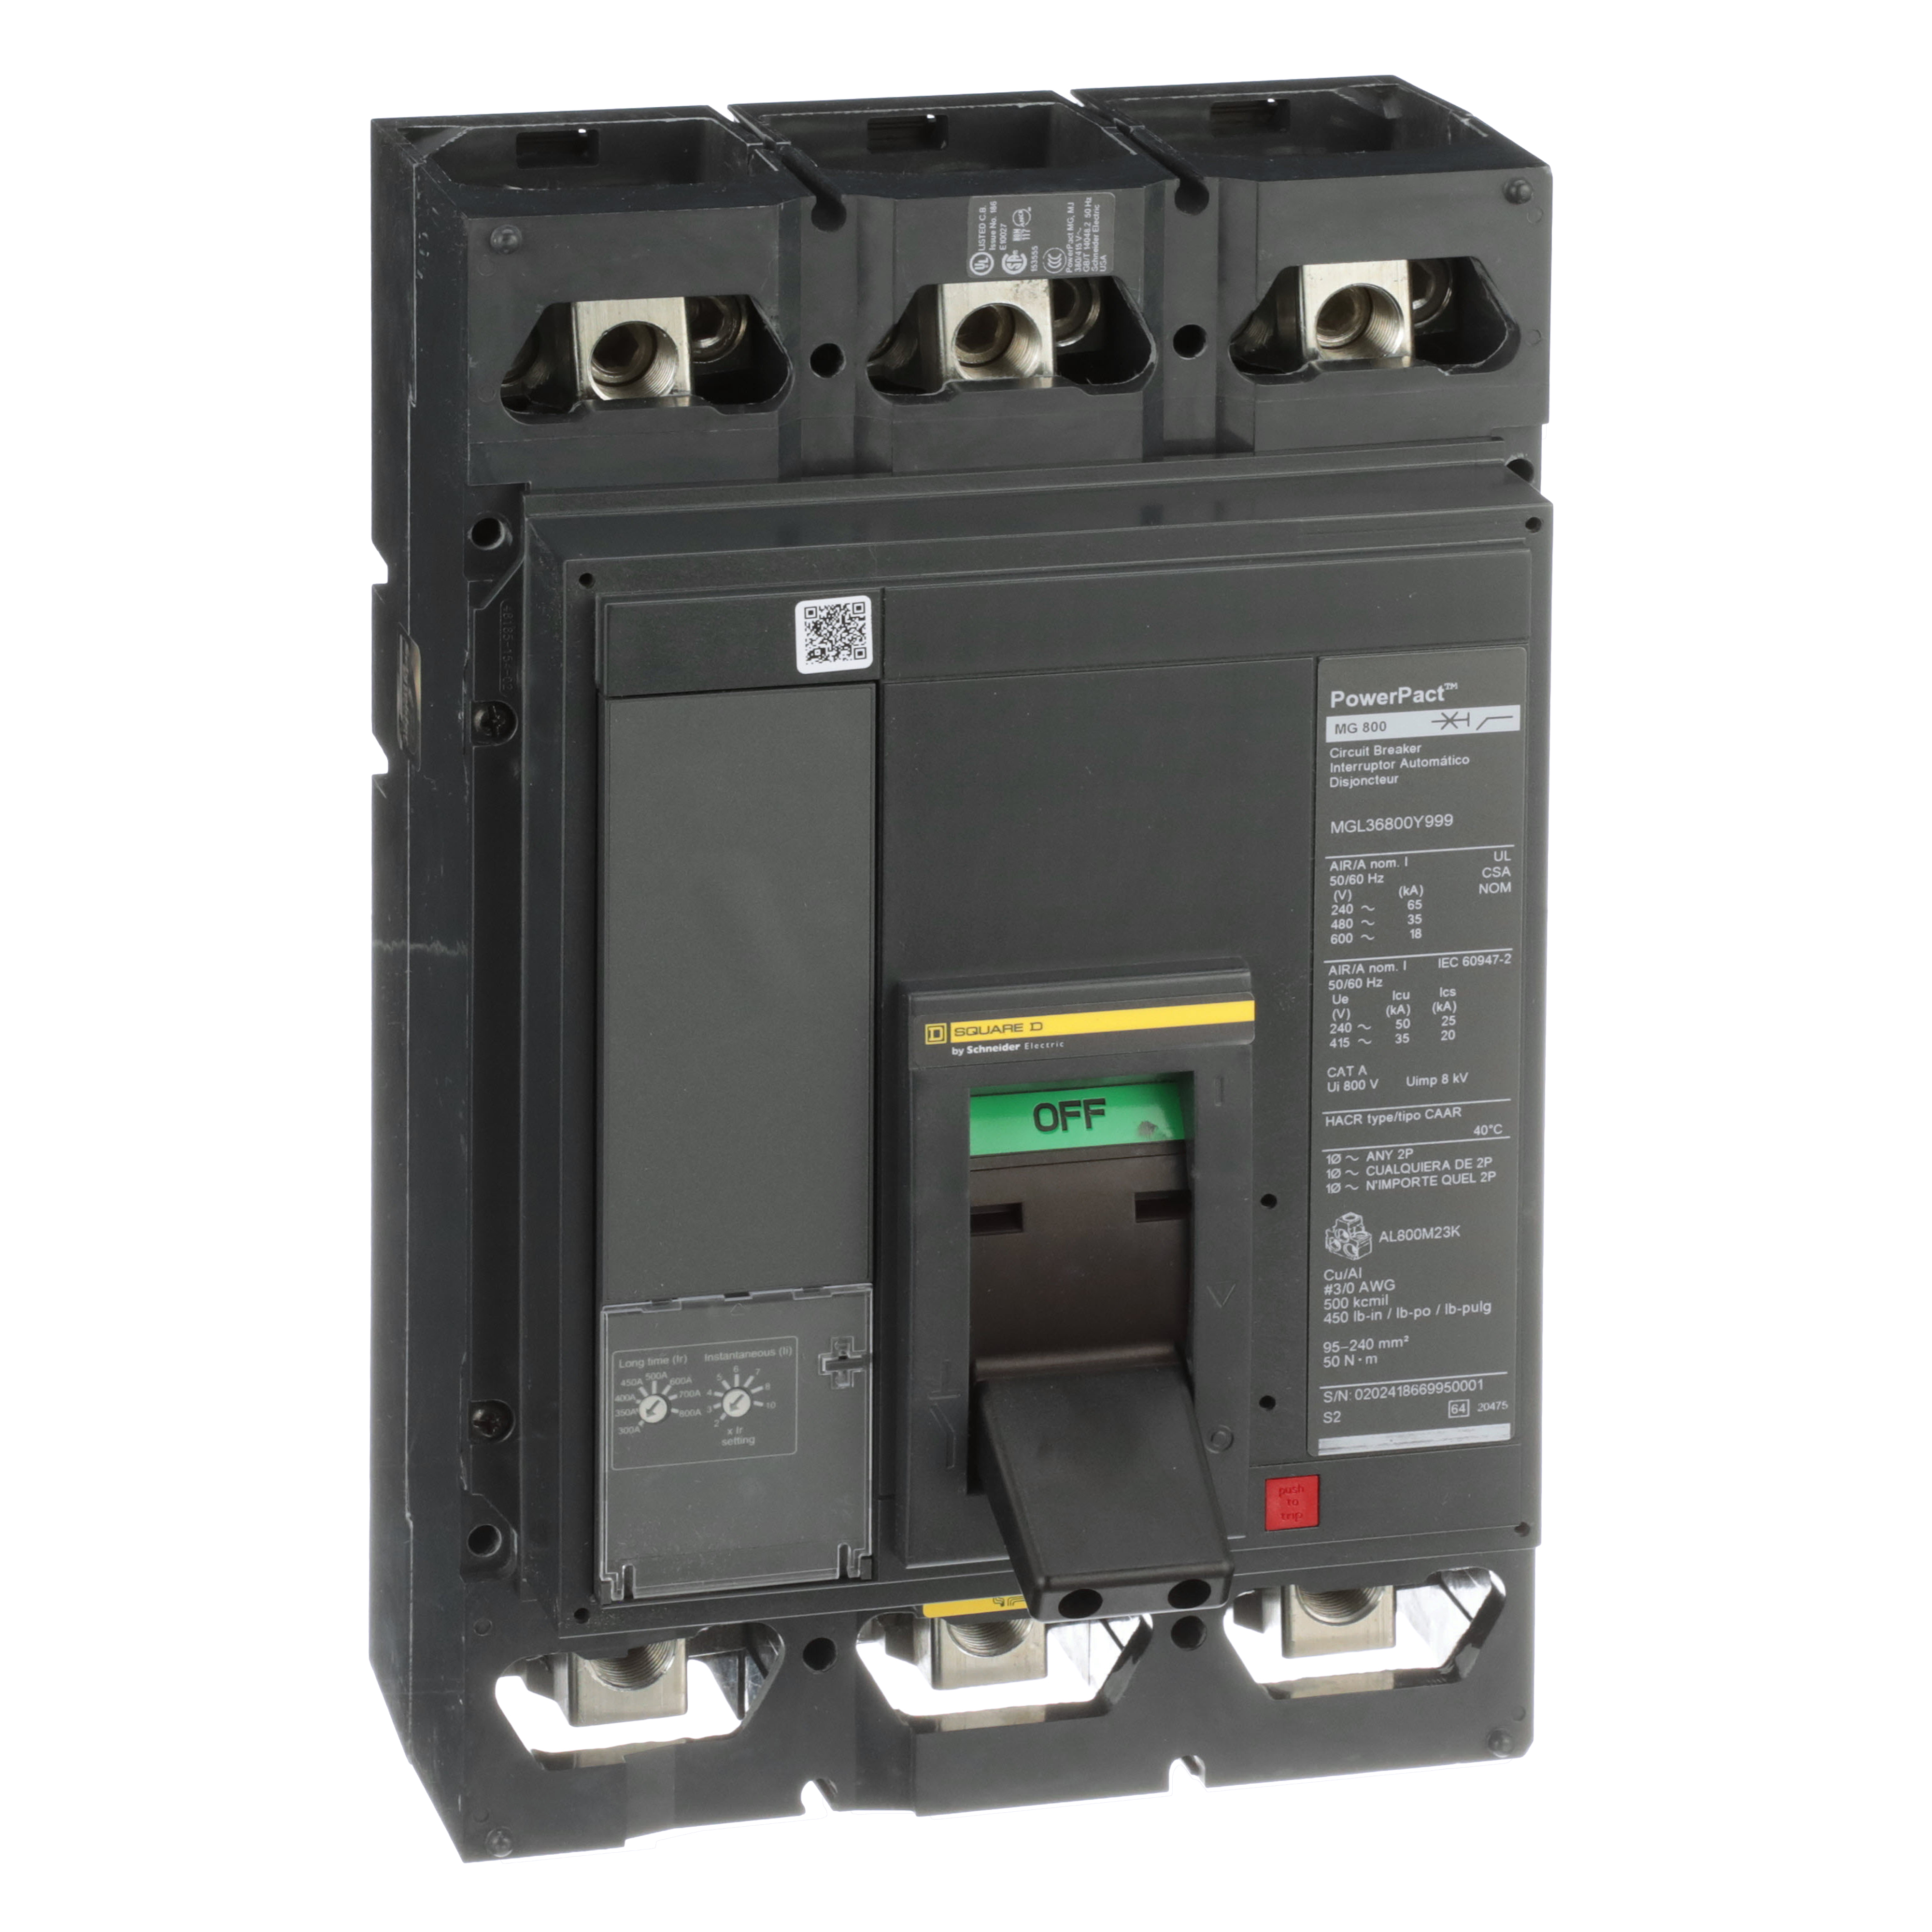 Circuit breaker, PowerPacT M, 300A to 800A, 3 pole, 600VAC, 25kA, lugs, adjustable trip, 80%, control wire both